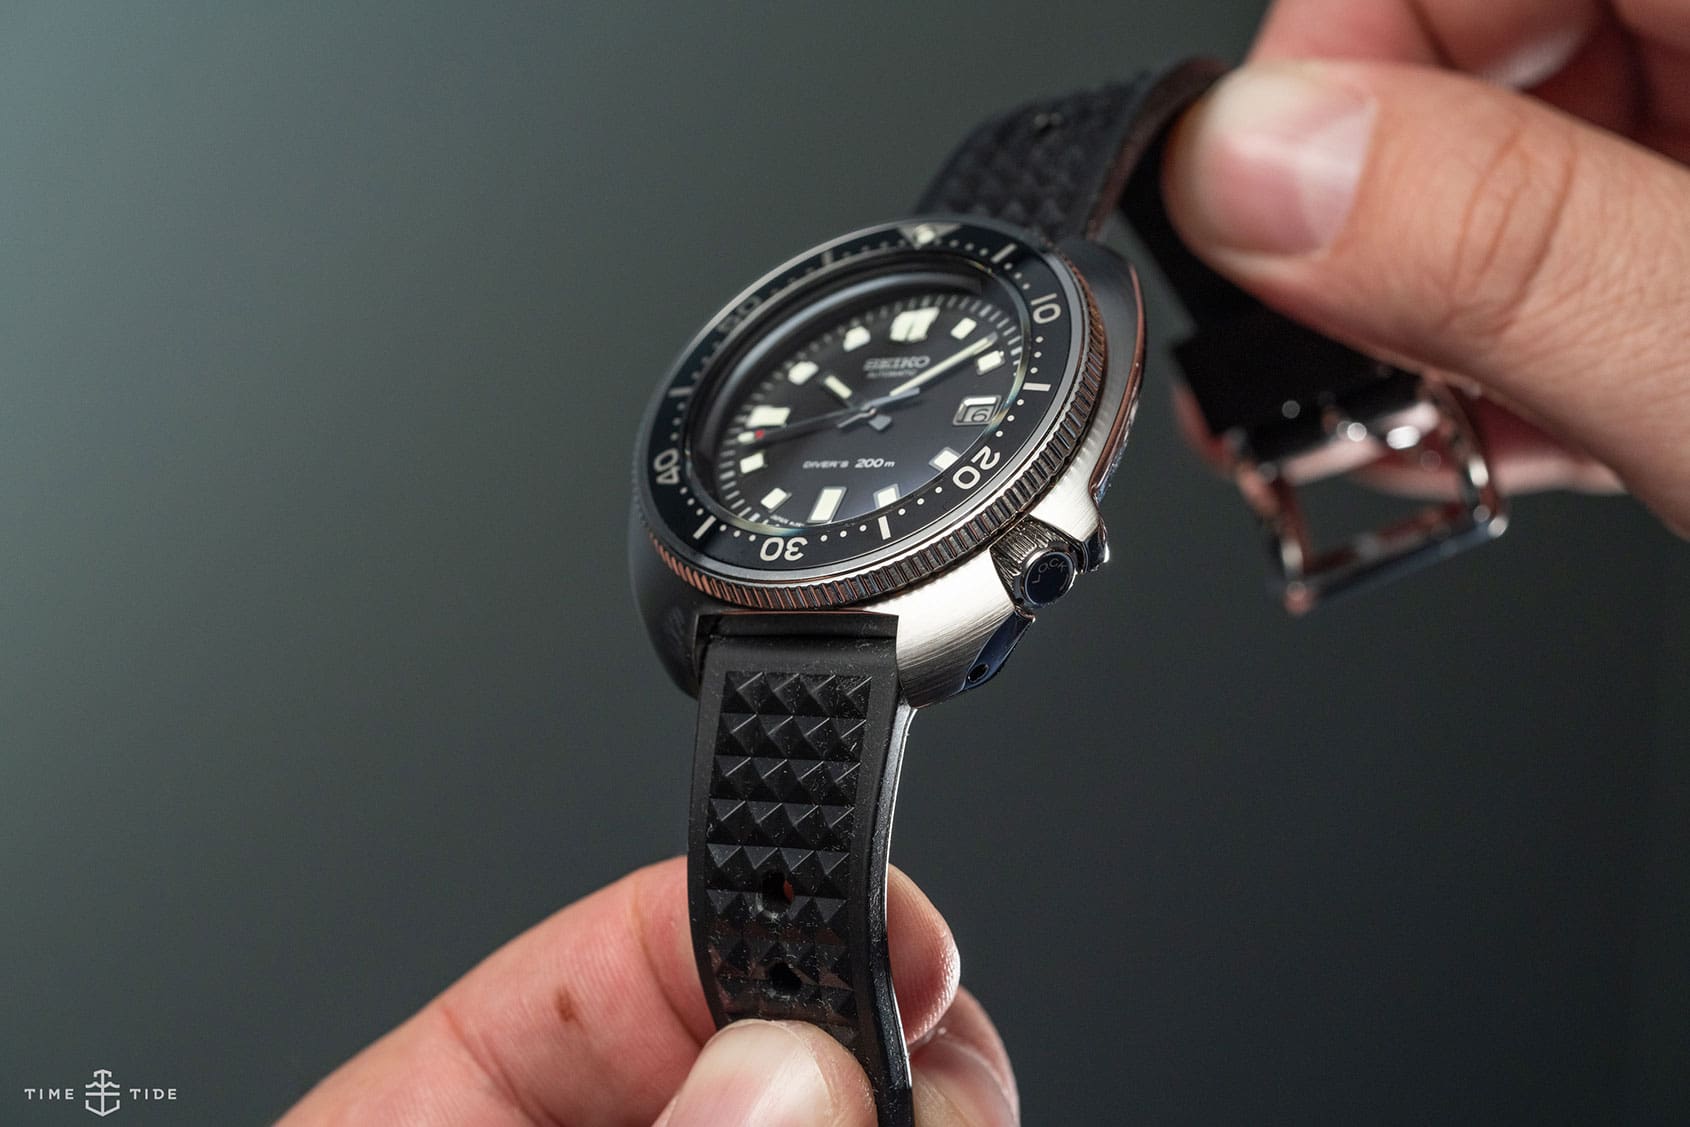 HANDS-ON: The Seiko Diver’s Re-creation Limited Edition SLA033